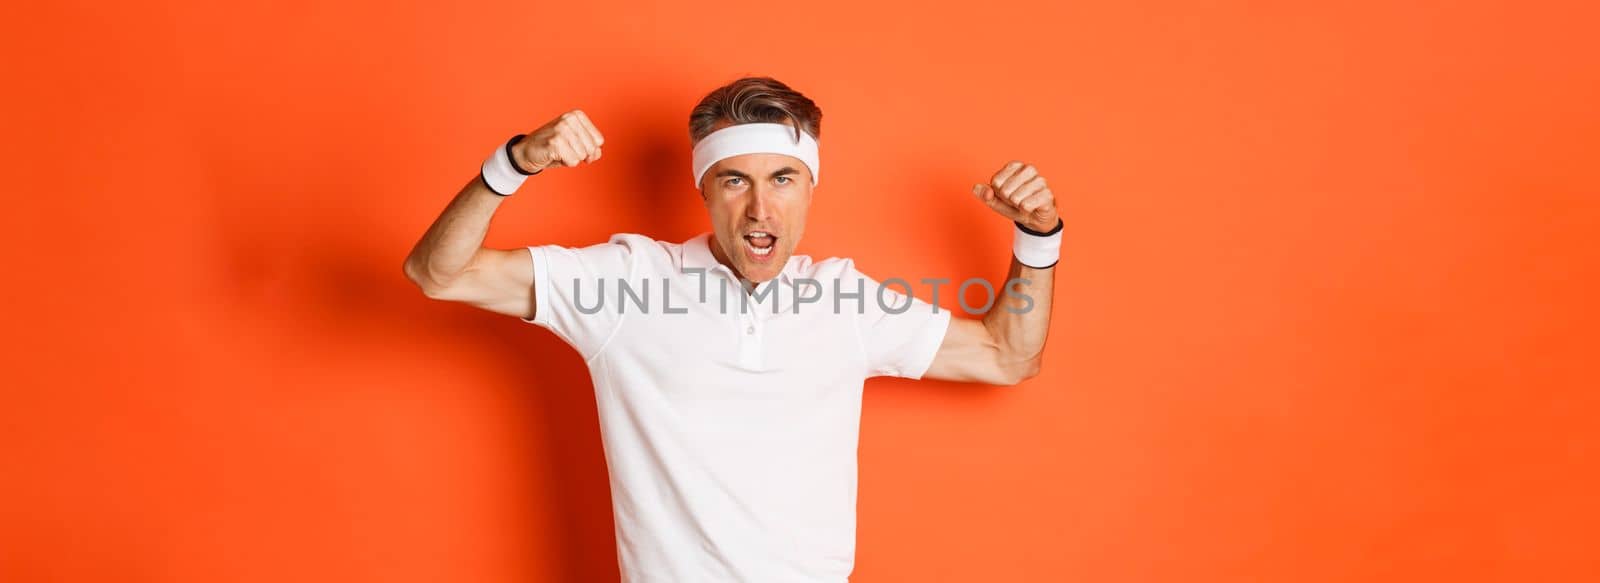 Image of funny middle-aged sportsman in white headband and t-shirt, flexing biceps to show-off, standing against orange background.